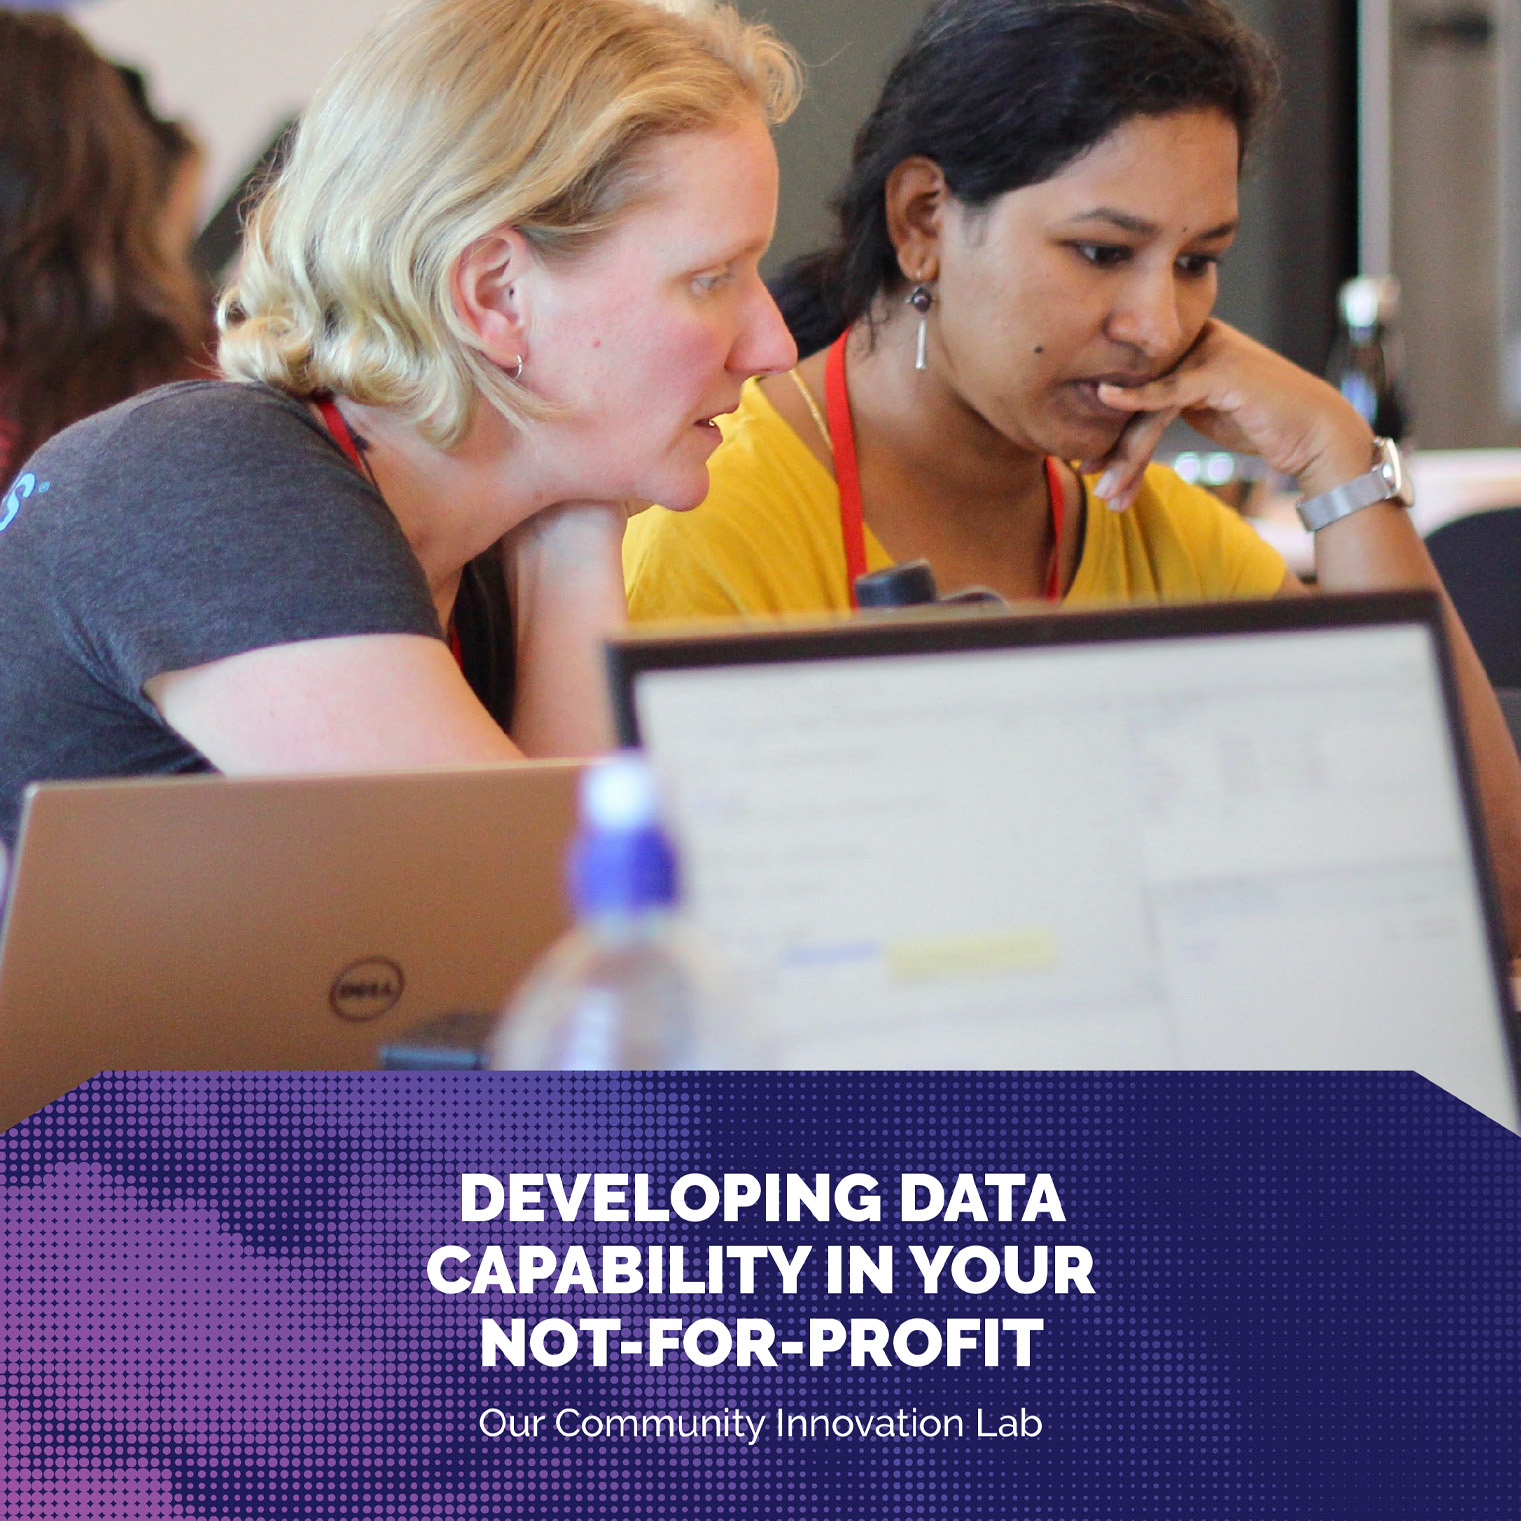 Developing Data Capability in Your Not-for-Profit